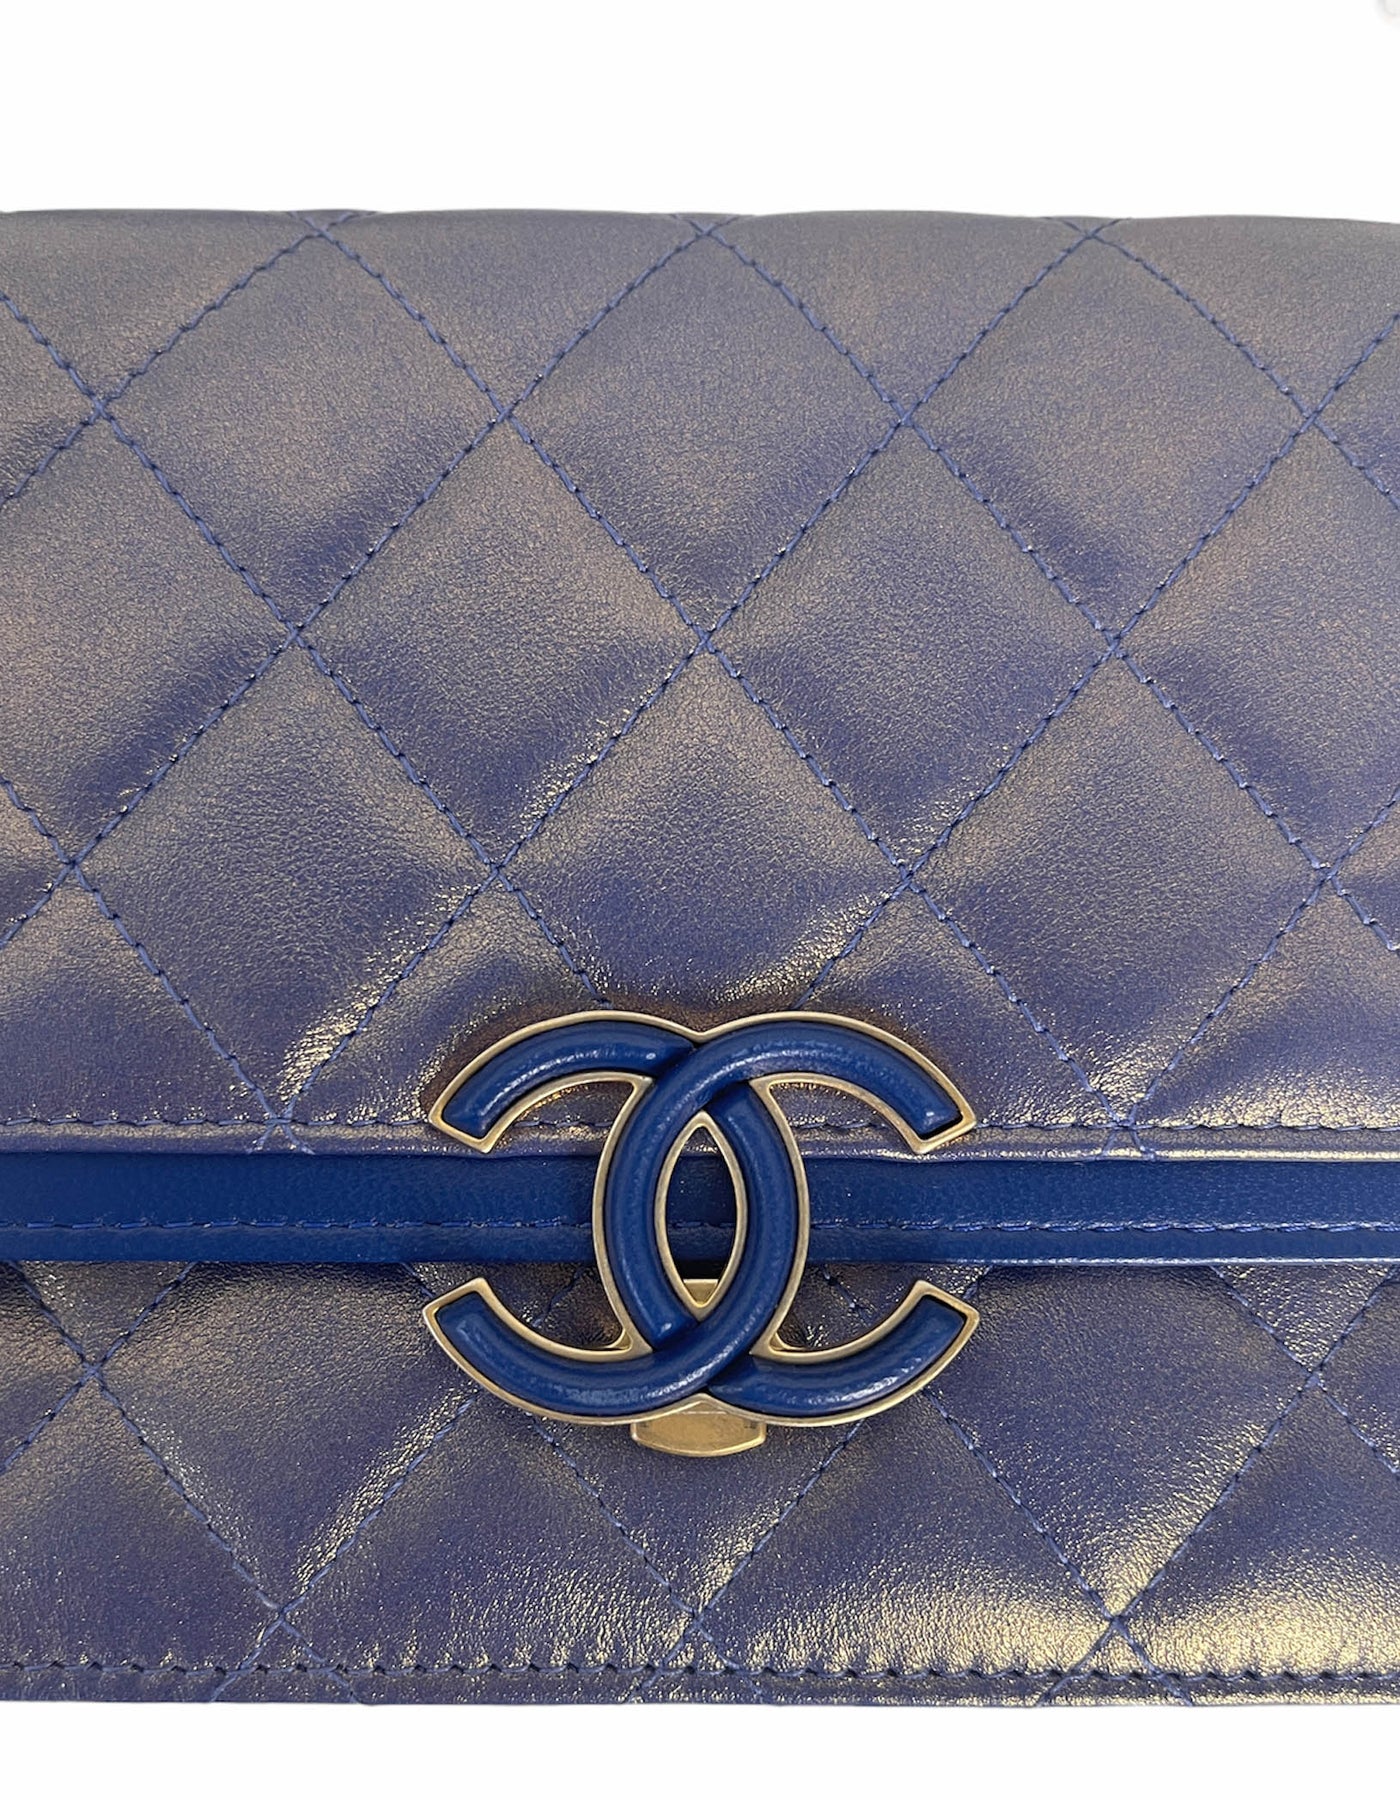 Chanel Iridescent Quilted Lambskin WOC Wallet On Chain Silver